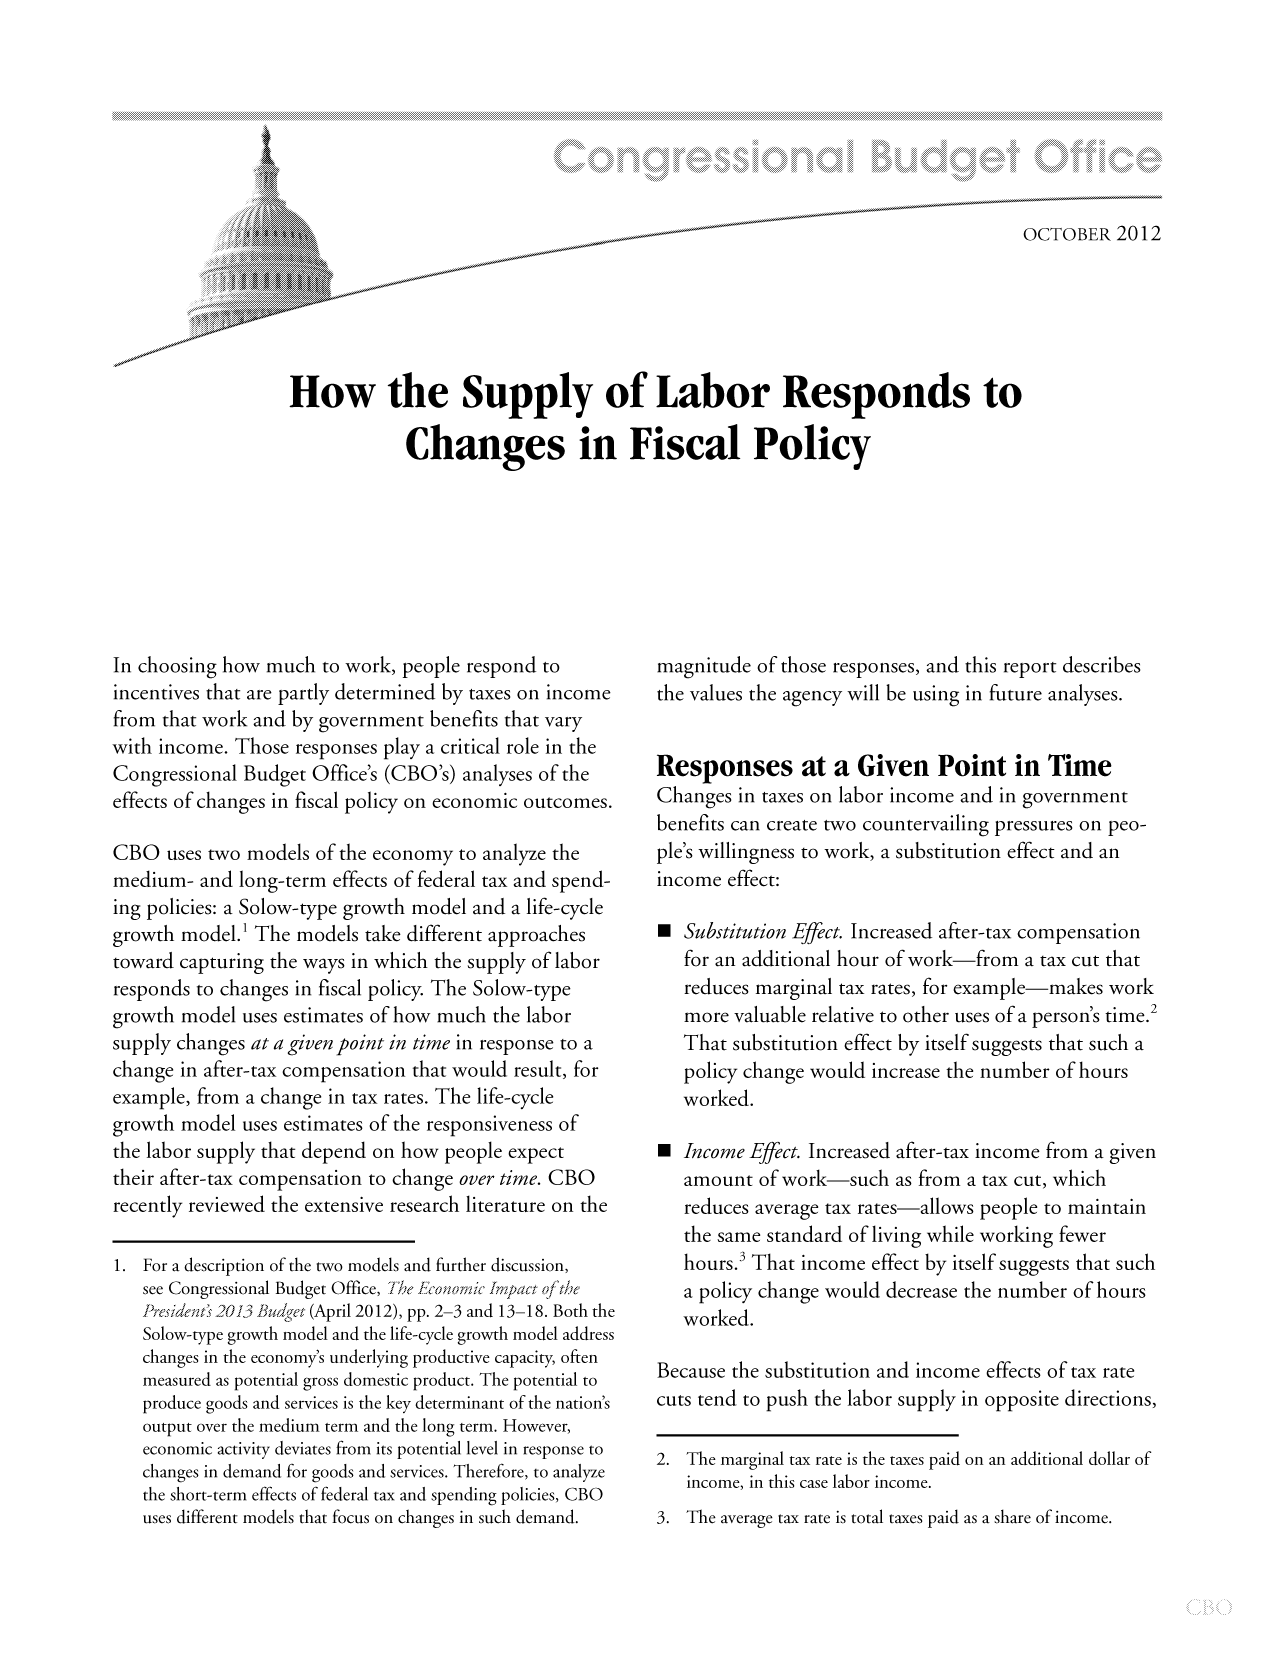 handle is hein.congrec/cbo10921 and id is 1 raw text is: OCTOBER 2012
How the Supply of Labor Responds to
Changes in Fiscal Policy

In choosing how much to work, people respond to
incentives that are partly determined by taxes on income
from that work and by government benefits that vary
with income. Those responses play a critical role in the
Congressional Budget Office's (CBO's) analyses of the
effects of changes in fiscal policy on economic outcomes.
CBO uses two models of the economy to analyze the
medium- and long-term effects of federal tax and spend-
ing policies: a Solow-type growth model and a life-cycle
growth model.' The models take different approaches
toward capturing the ways in which the supply of labor
responds to changes in fiscal policy. The Solow-type
growth model uses estimates of how much the labor
supply changes at a given point in time in response to a
change in after-tax compensation that would result, for
example, from a change in tax rates. The life-cycle
growth model uses estimates of the responsiveness of
the labor supply that depend on how people expect
their after-tax compensation to change over time. CBO
recently reviewed the extensive research literature on the
1. For a description of the two models and further discussion,
see Congressional Budget Office, The Fconoic frnpact of the
Pre, rideiit, 2013 Budget (April 2012), pp. 2-3 and 13-18. Both the
Solow-type growth model and the life-cycle growth model address
changes in the economy's underlying productive capacity, often
measured as potential gross domestic product. The potential to
produce goods and services is the key determinant of the nation's
output over the medium term and the long term. However,
economic activity deviates from its potential level in response to
changes in demand for goods and services. Therefore, to analyze
the short-term effects of federal tax and spending policies, CBO
uses different models that focus on changes in such demand.

magnitude of those responses, and this report describes
the values the agency will be using in future analyses.
Responses at a Given Point in Time
Changes in taxes on labor income and in government
benefits can create two countervailing pressures on peo-
ple's willingness to work, a substitution effect and an
income effect:
 Substitution Effect. Increased after-tax compensation
for an additional hour of work-from a tax cut that
reduces marginal tax rates, for example-makes work
more valuable relative to other uses of a person's time.2
That substitution effect by itself suggests that such a
policy change would increase the number of hours
worked.
 Income Effect. Increased after-tax income from a given
amount of work-such as from a tax cut, which
reduces average tax rates-allows people to maintain
the same standard of living while working fewer
hours.3 That income effect by itself suggests that such
a policy change would decrease the number of hours
worked.
Because the substitution and income effects of tax rate
cuts tend to push the labor supply in opposite directions,
2. The marginal tax rate is the taxes paid on an additional dollar of
income, in this case labor income.
3. The average tax rate is total taxes paid as a share of income.


